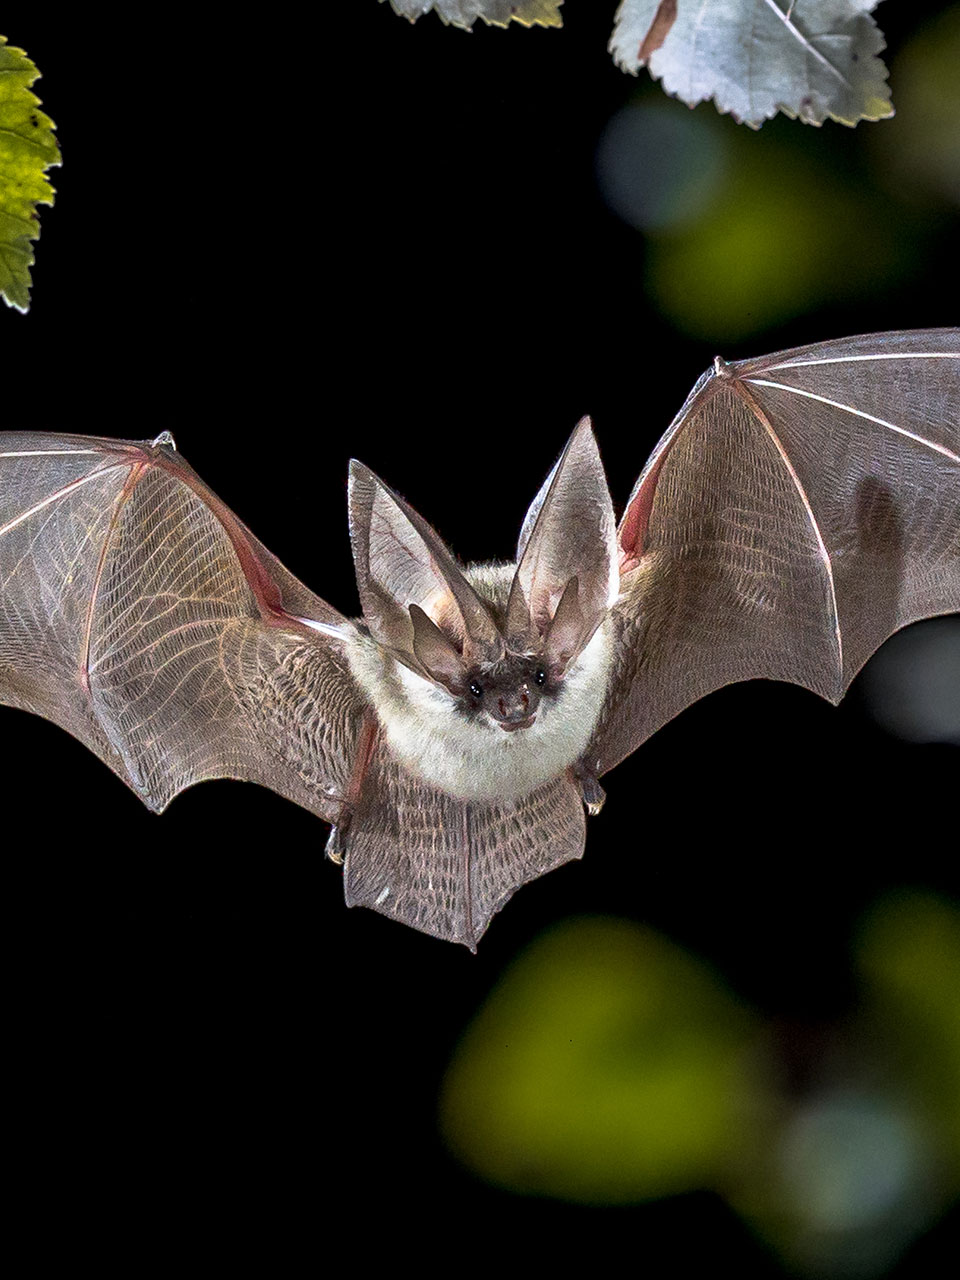 How to Get Rid of Bats: Bat Facts, Information, Pest Control